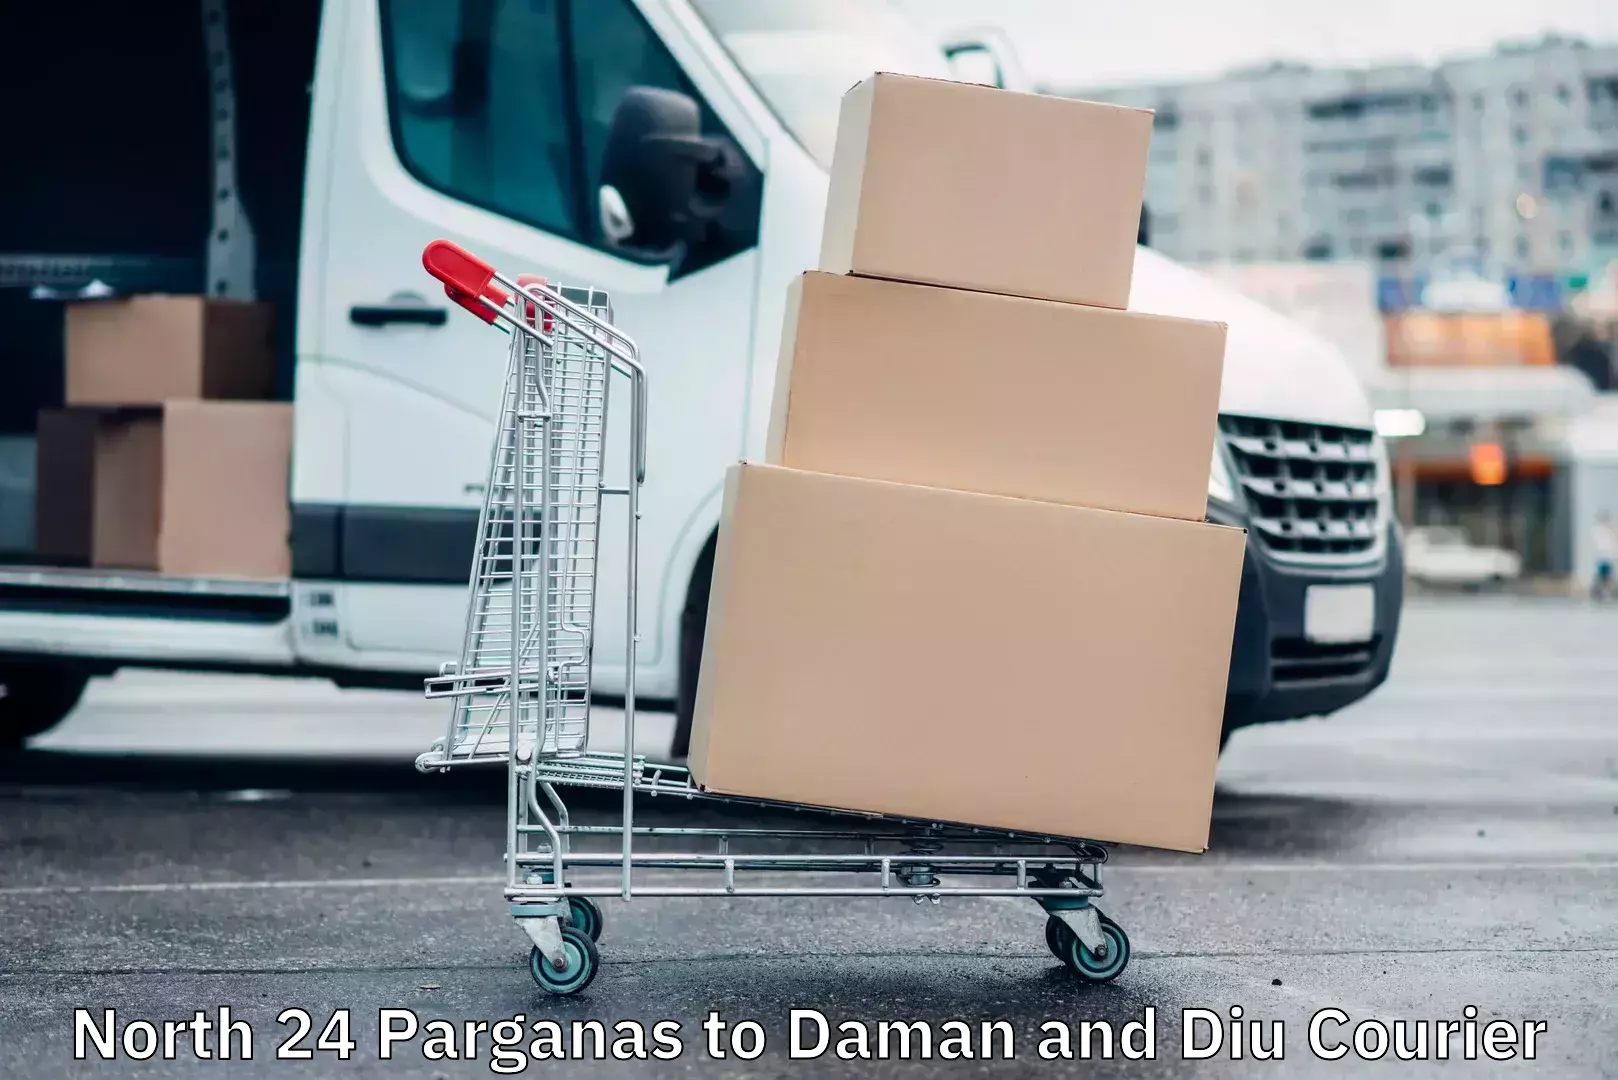 State-of-the-art courier technology North 24 Parganas to Daman and Diu